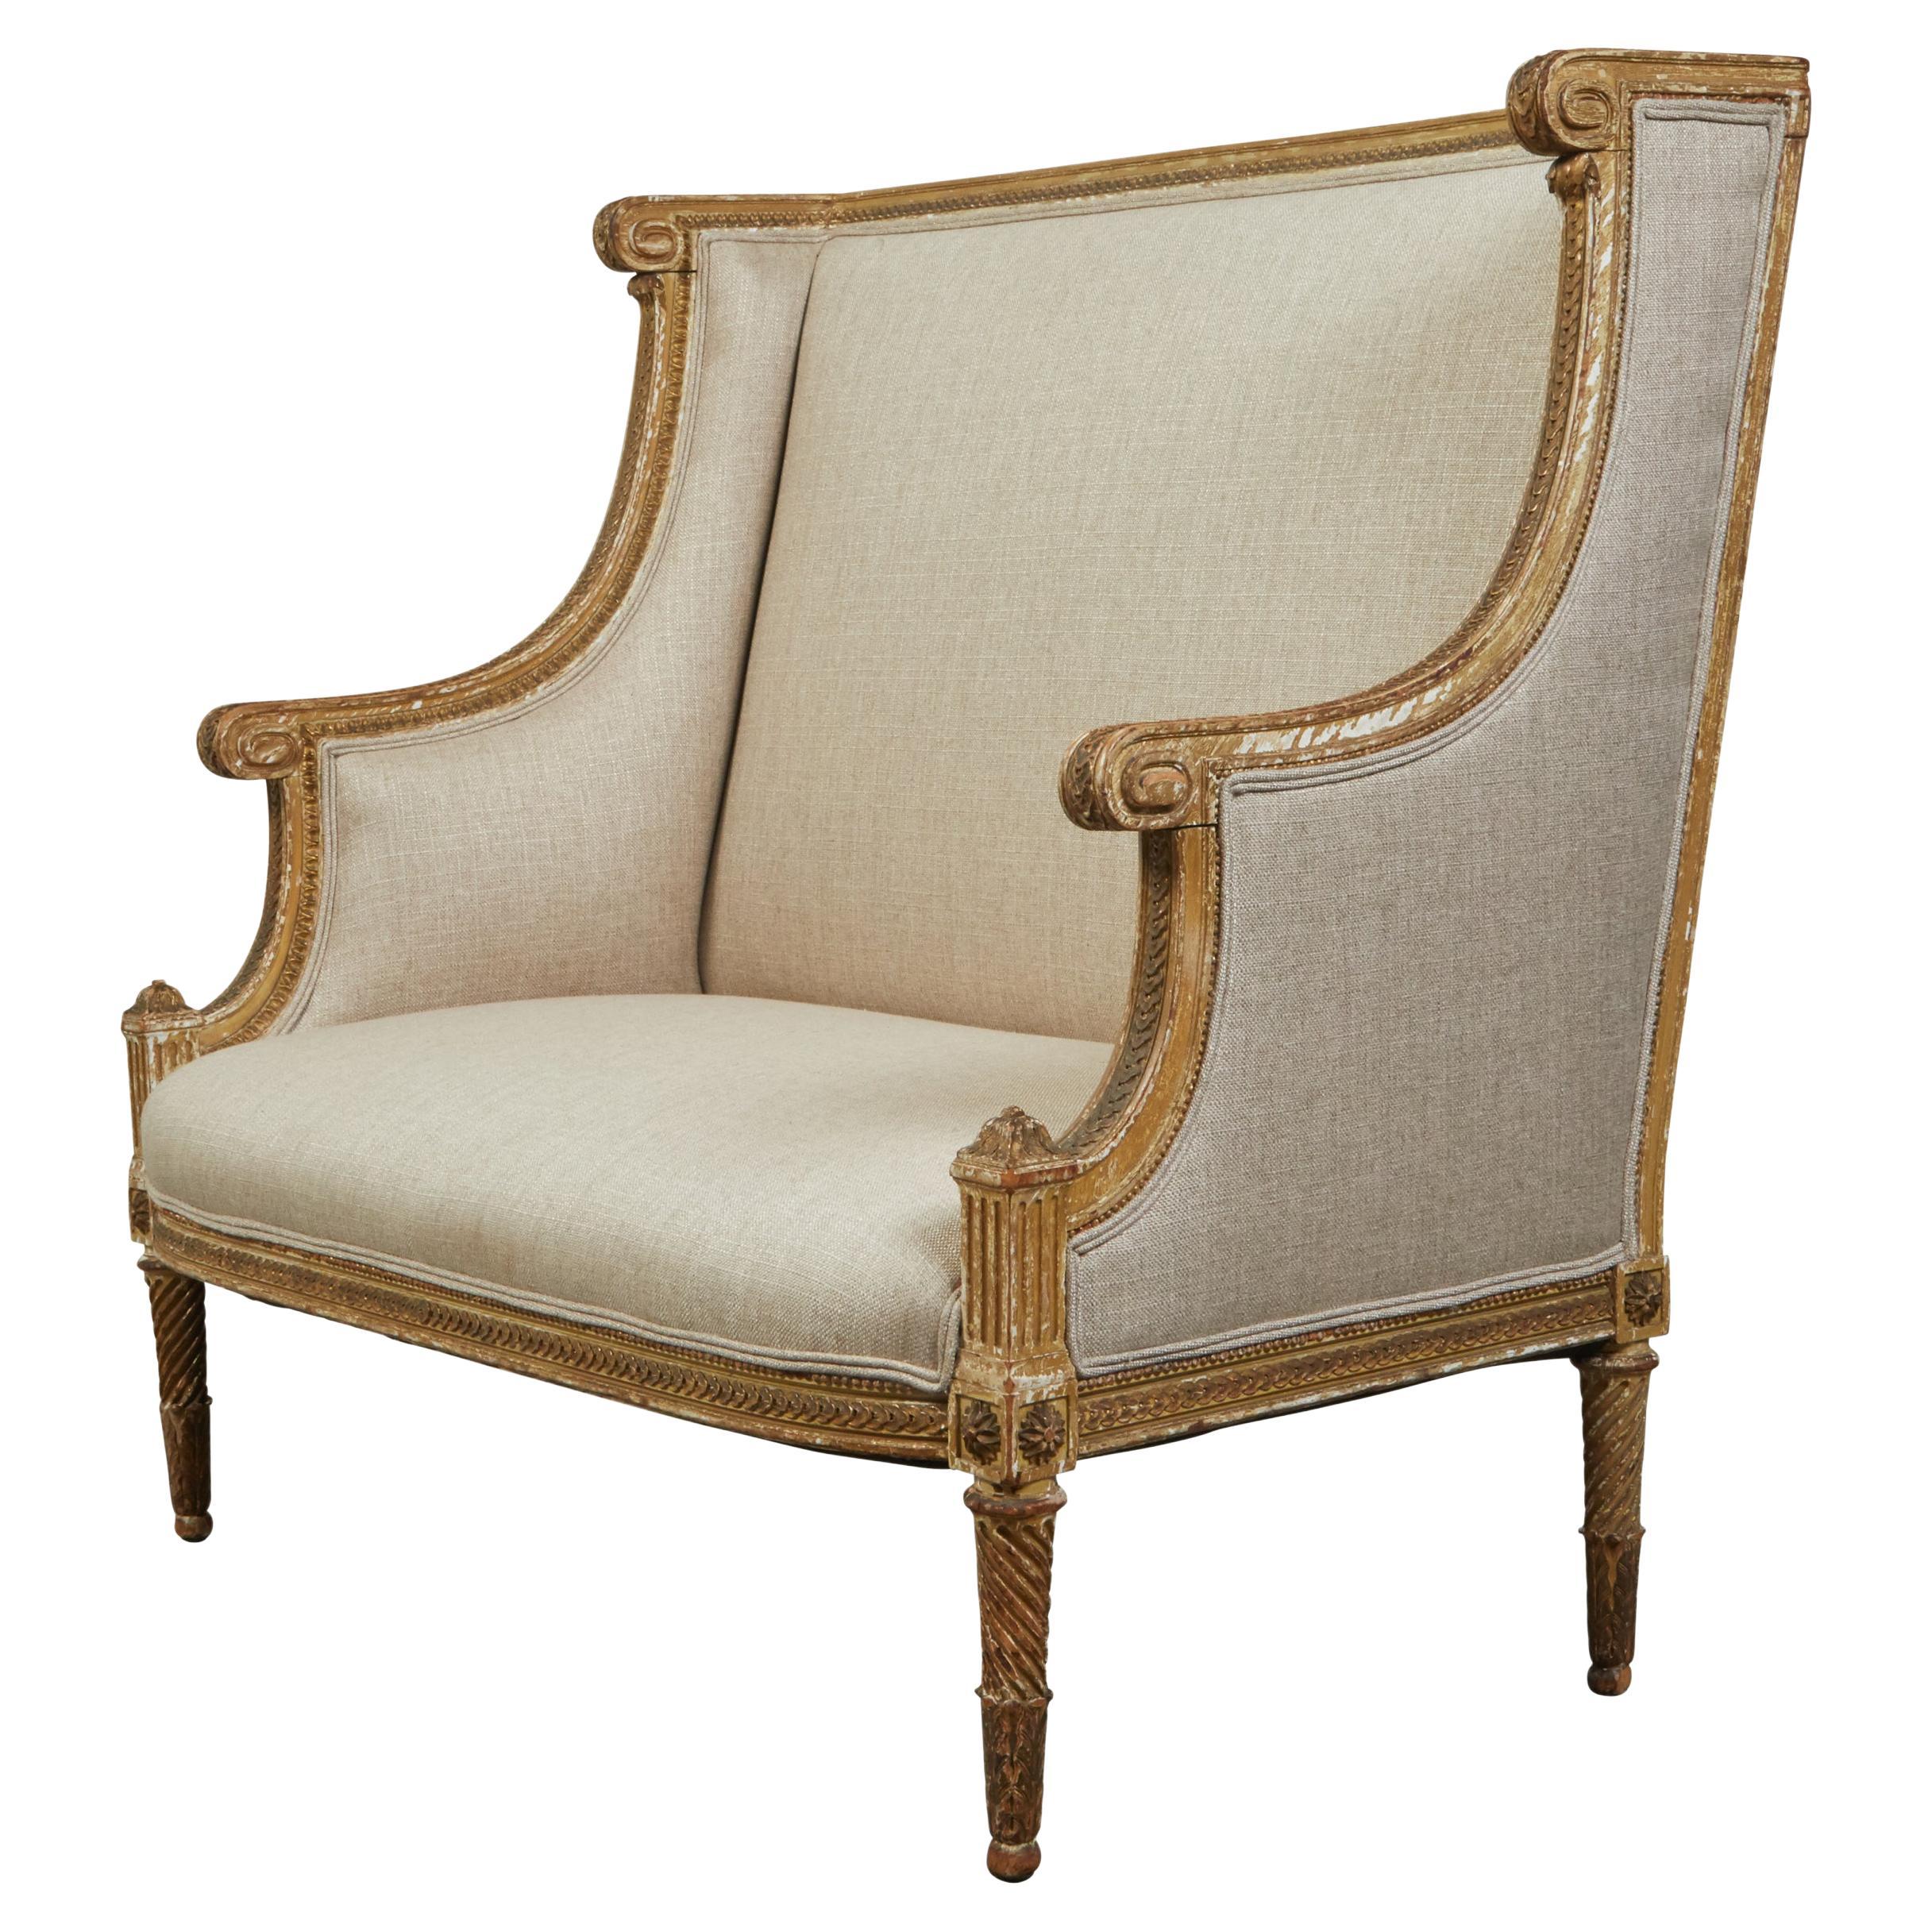 French 19th Century Louis XVI Style Giltwood Wingback Settee with Carved Motifs